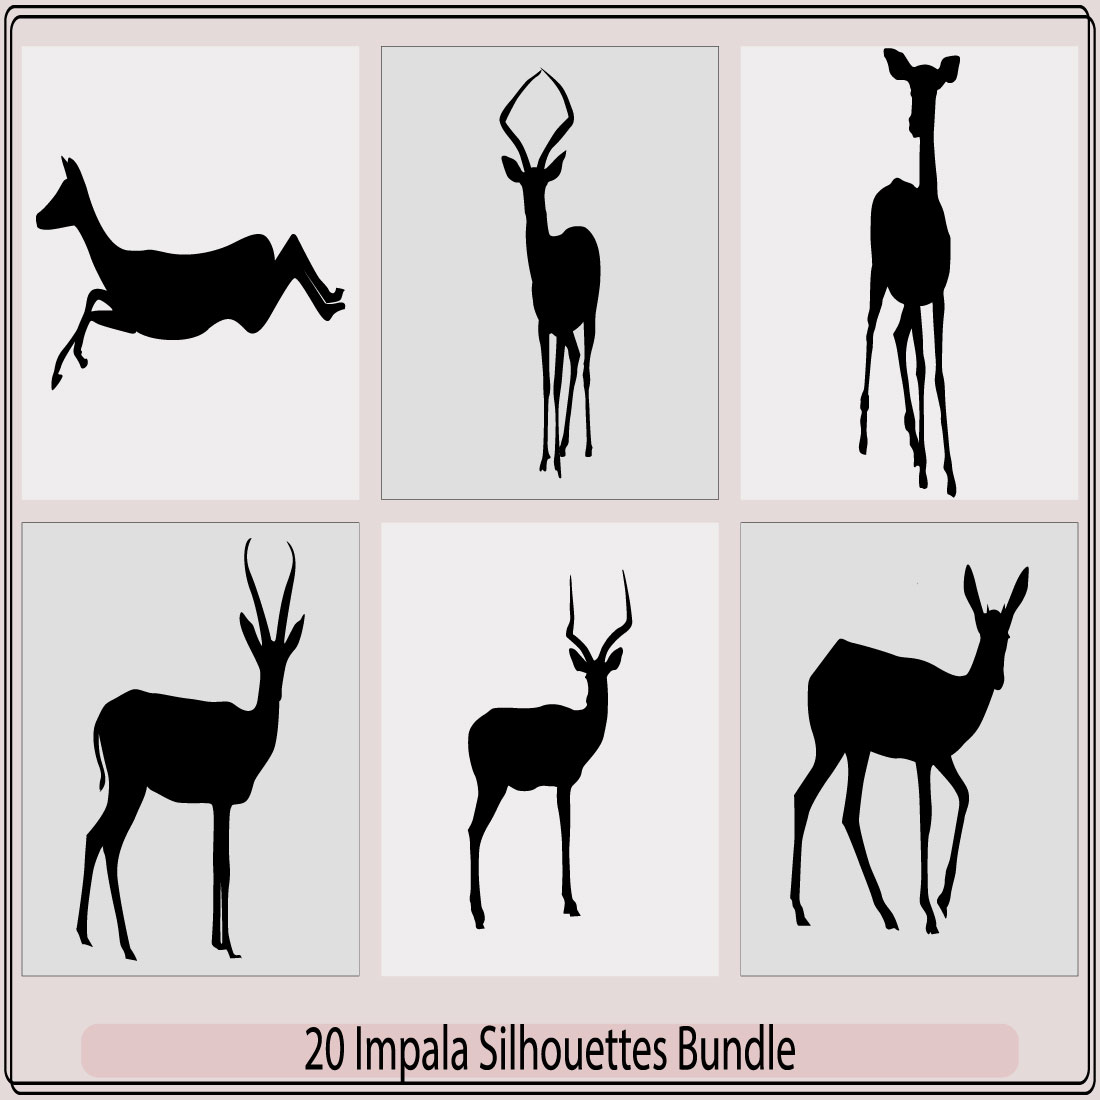 illustration of African impala silhouettes in the wild,Black and white vector silhouettes of Impala,Impala Silhouette Vector Logo For The Best Impala Icon Illustration,Set of editable vector silhouettes of running impala antelopes preview image.